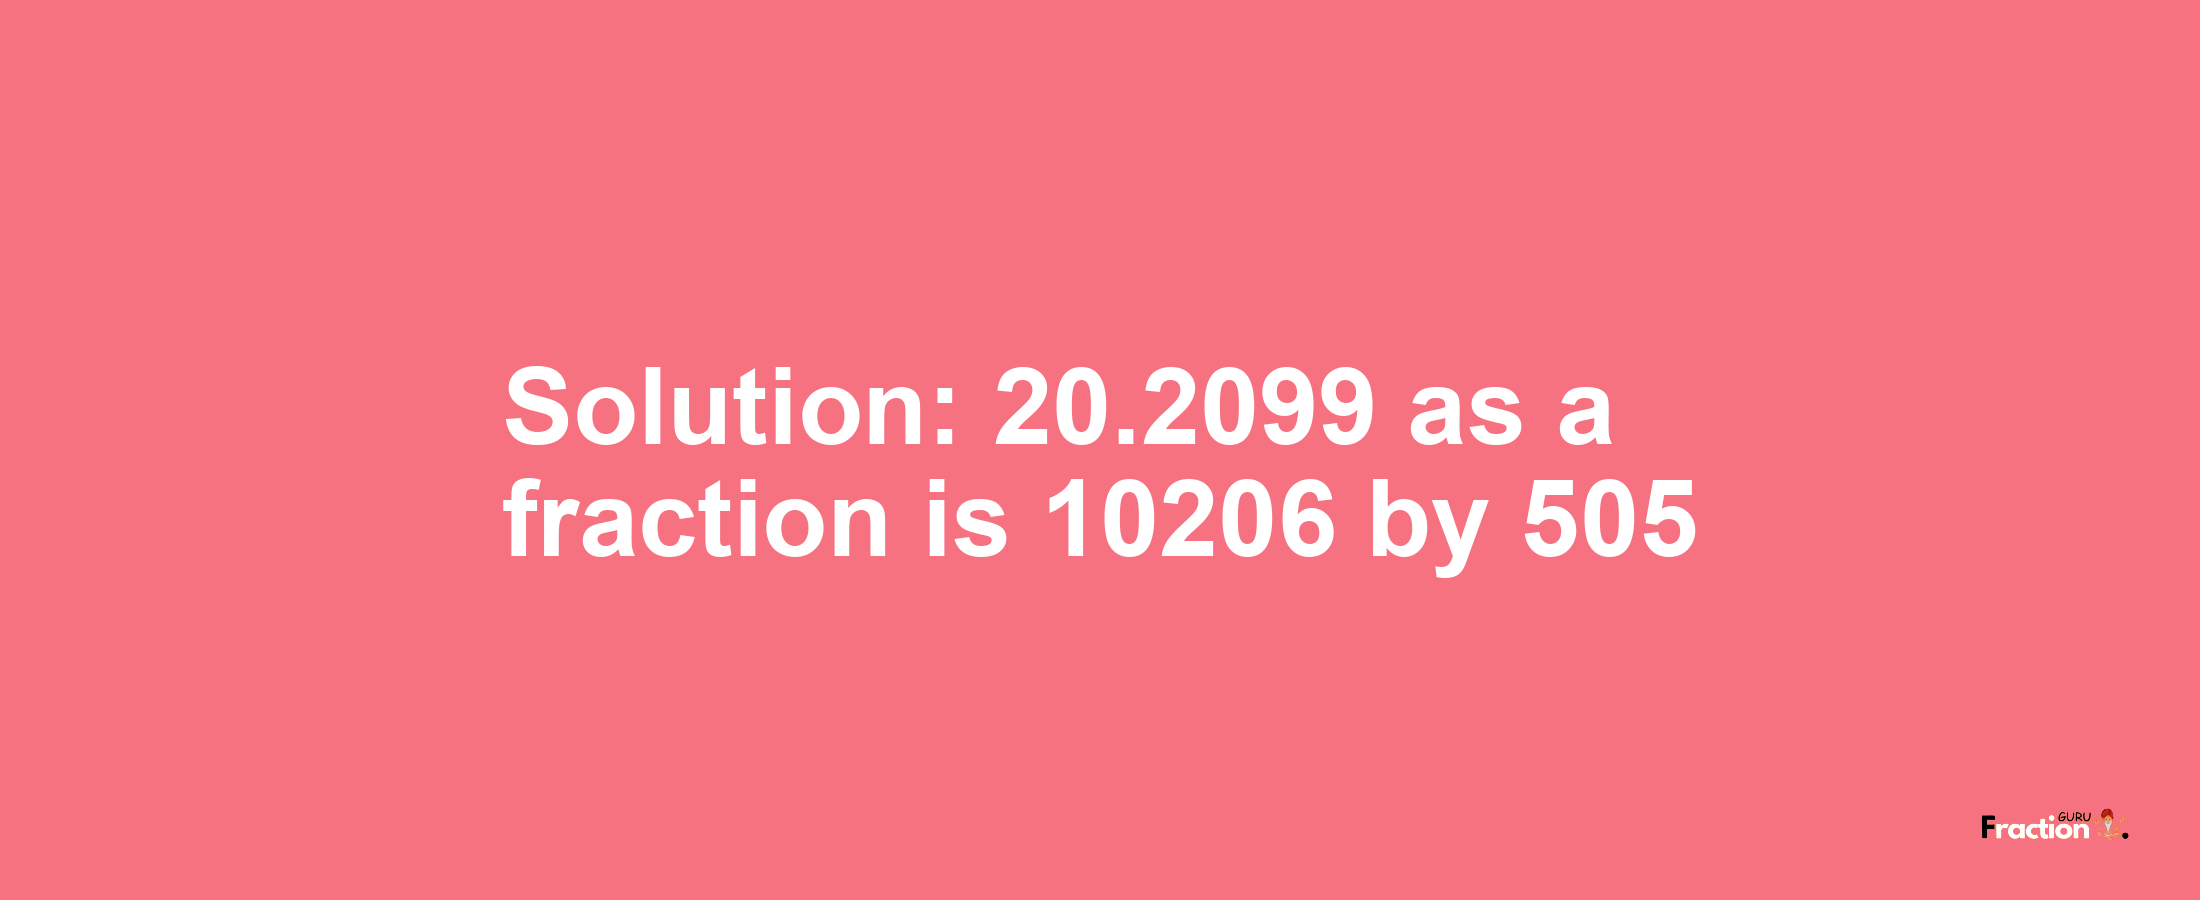 Solution:20.2099 as a fraction is 10206/505